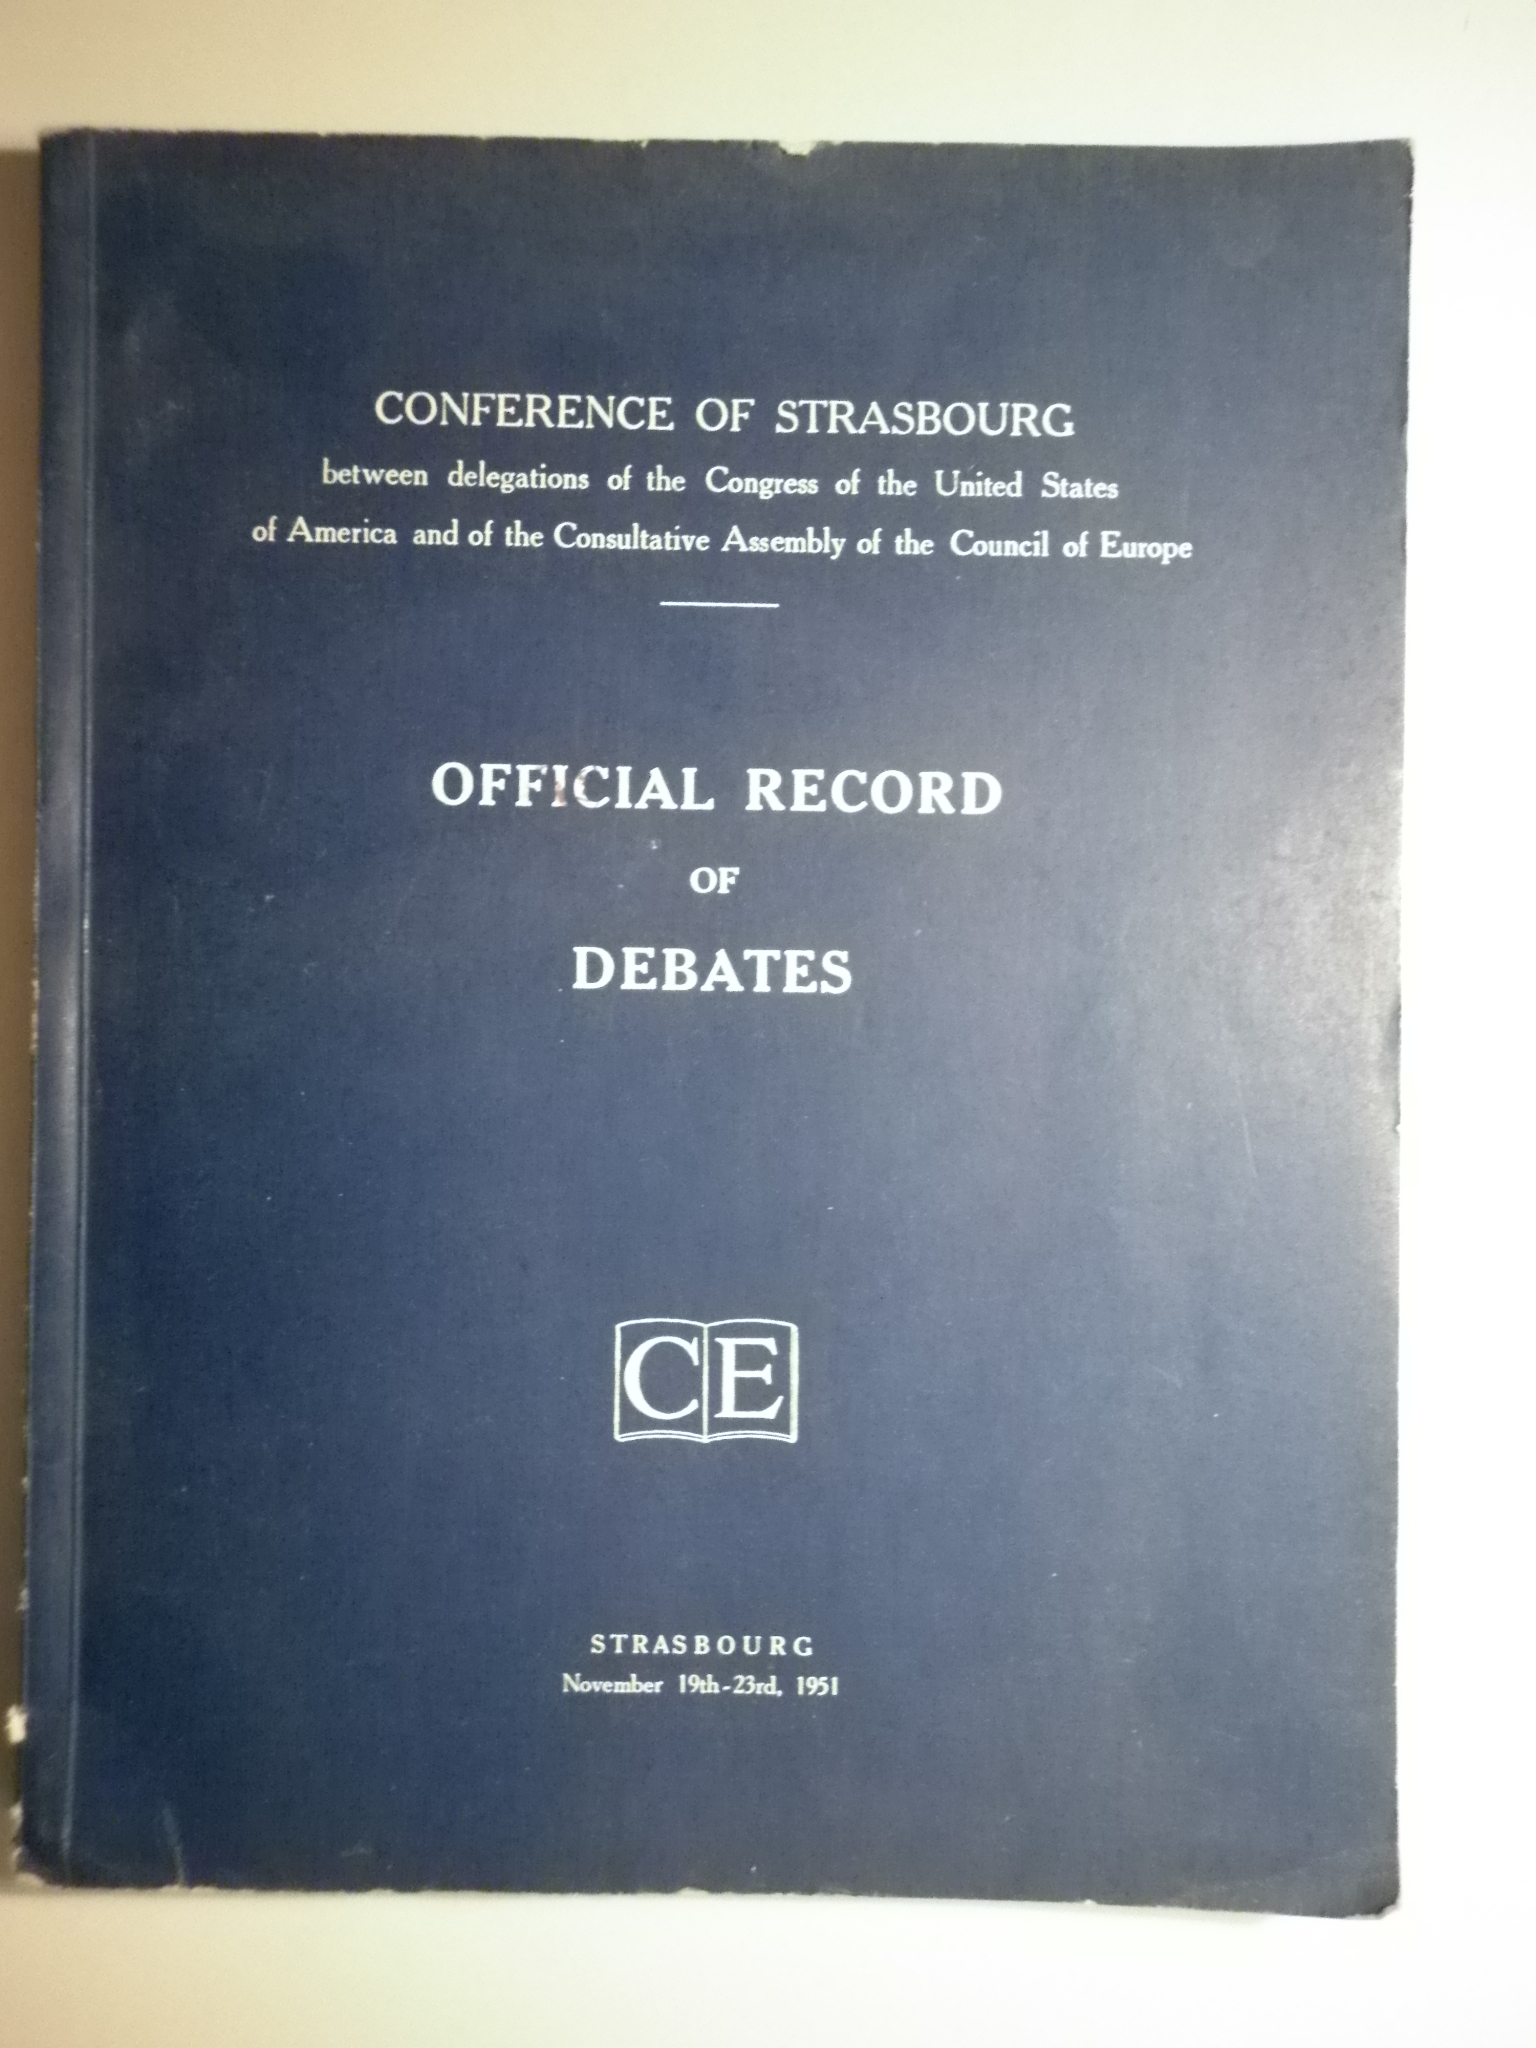 OFFICIAL RECORD OF DEBATES. CONFERENCE OF STRASBOURG - Strasbourg 1951